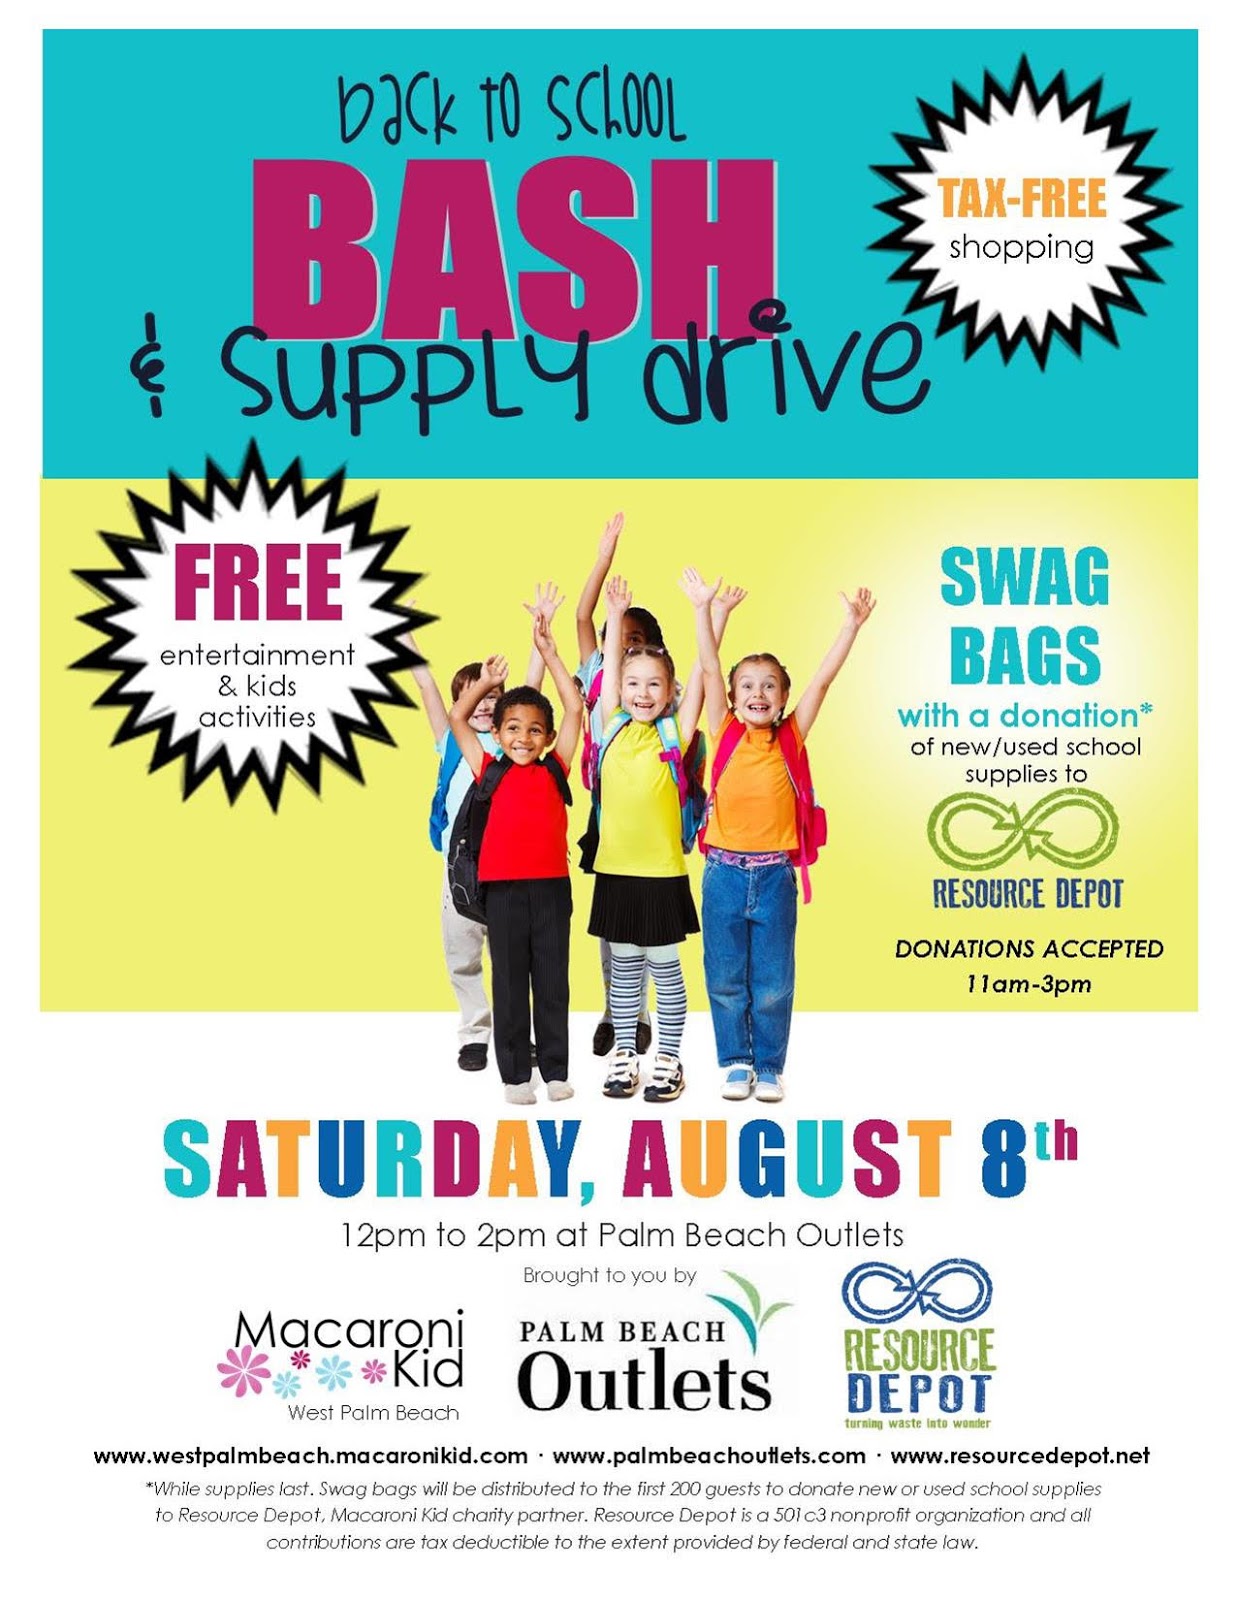 Back to School Bash & Supply Drive at Palm Beach Outlets Macaroni KID